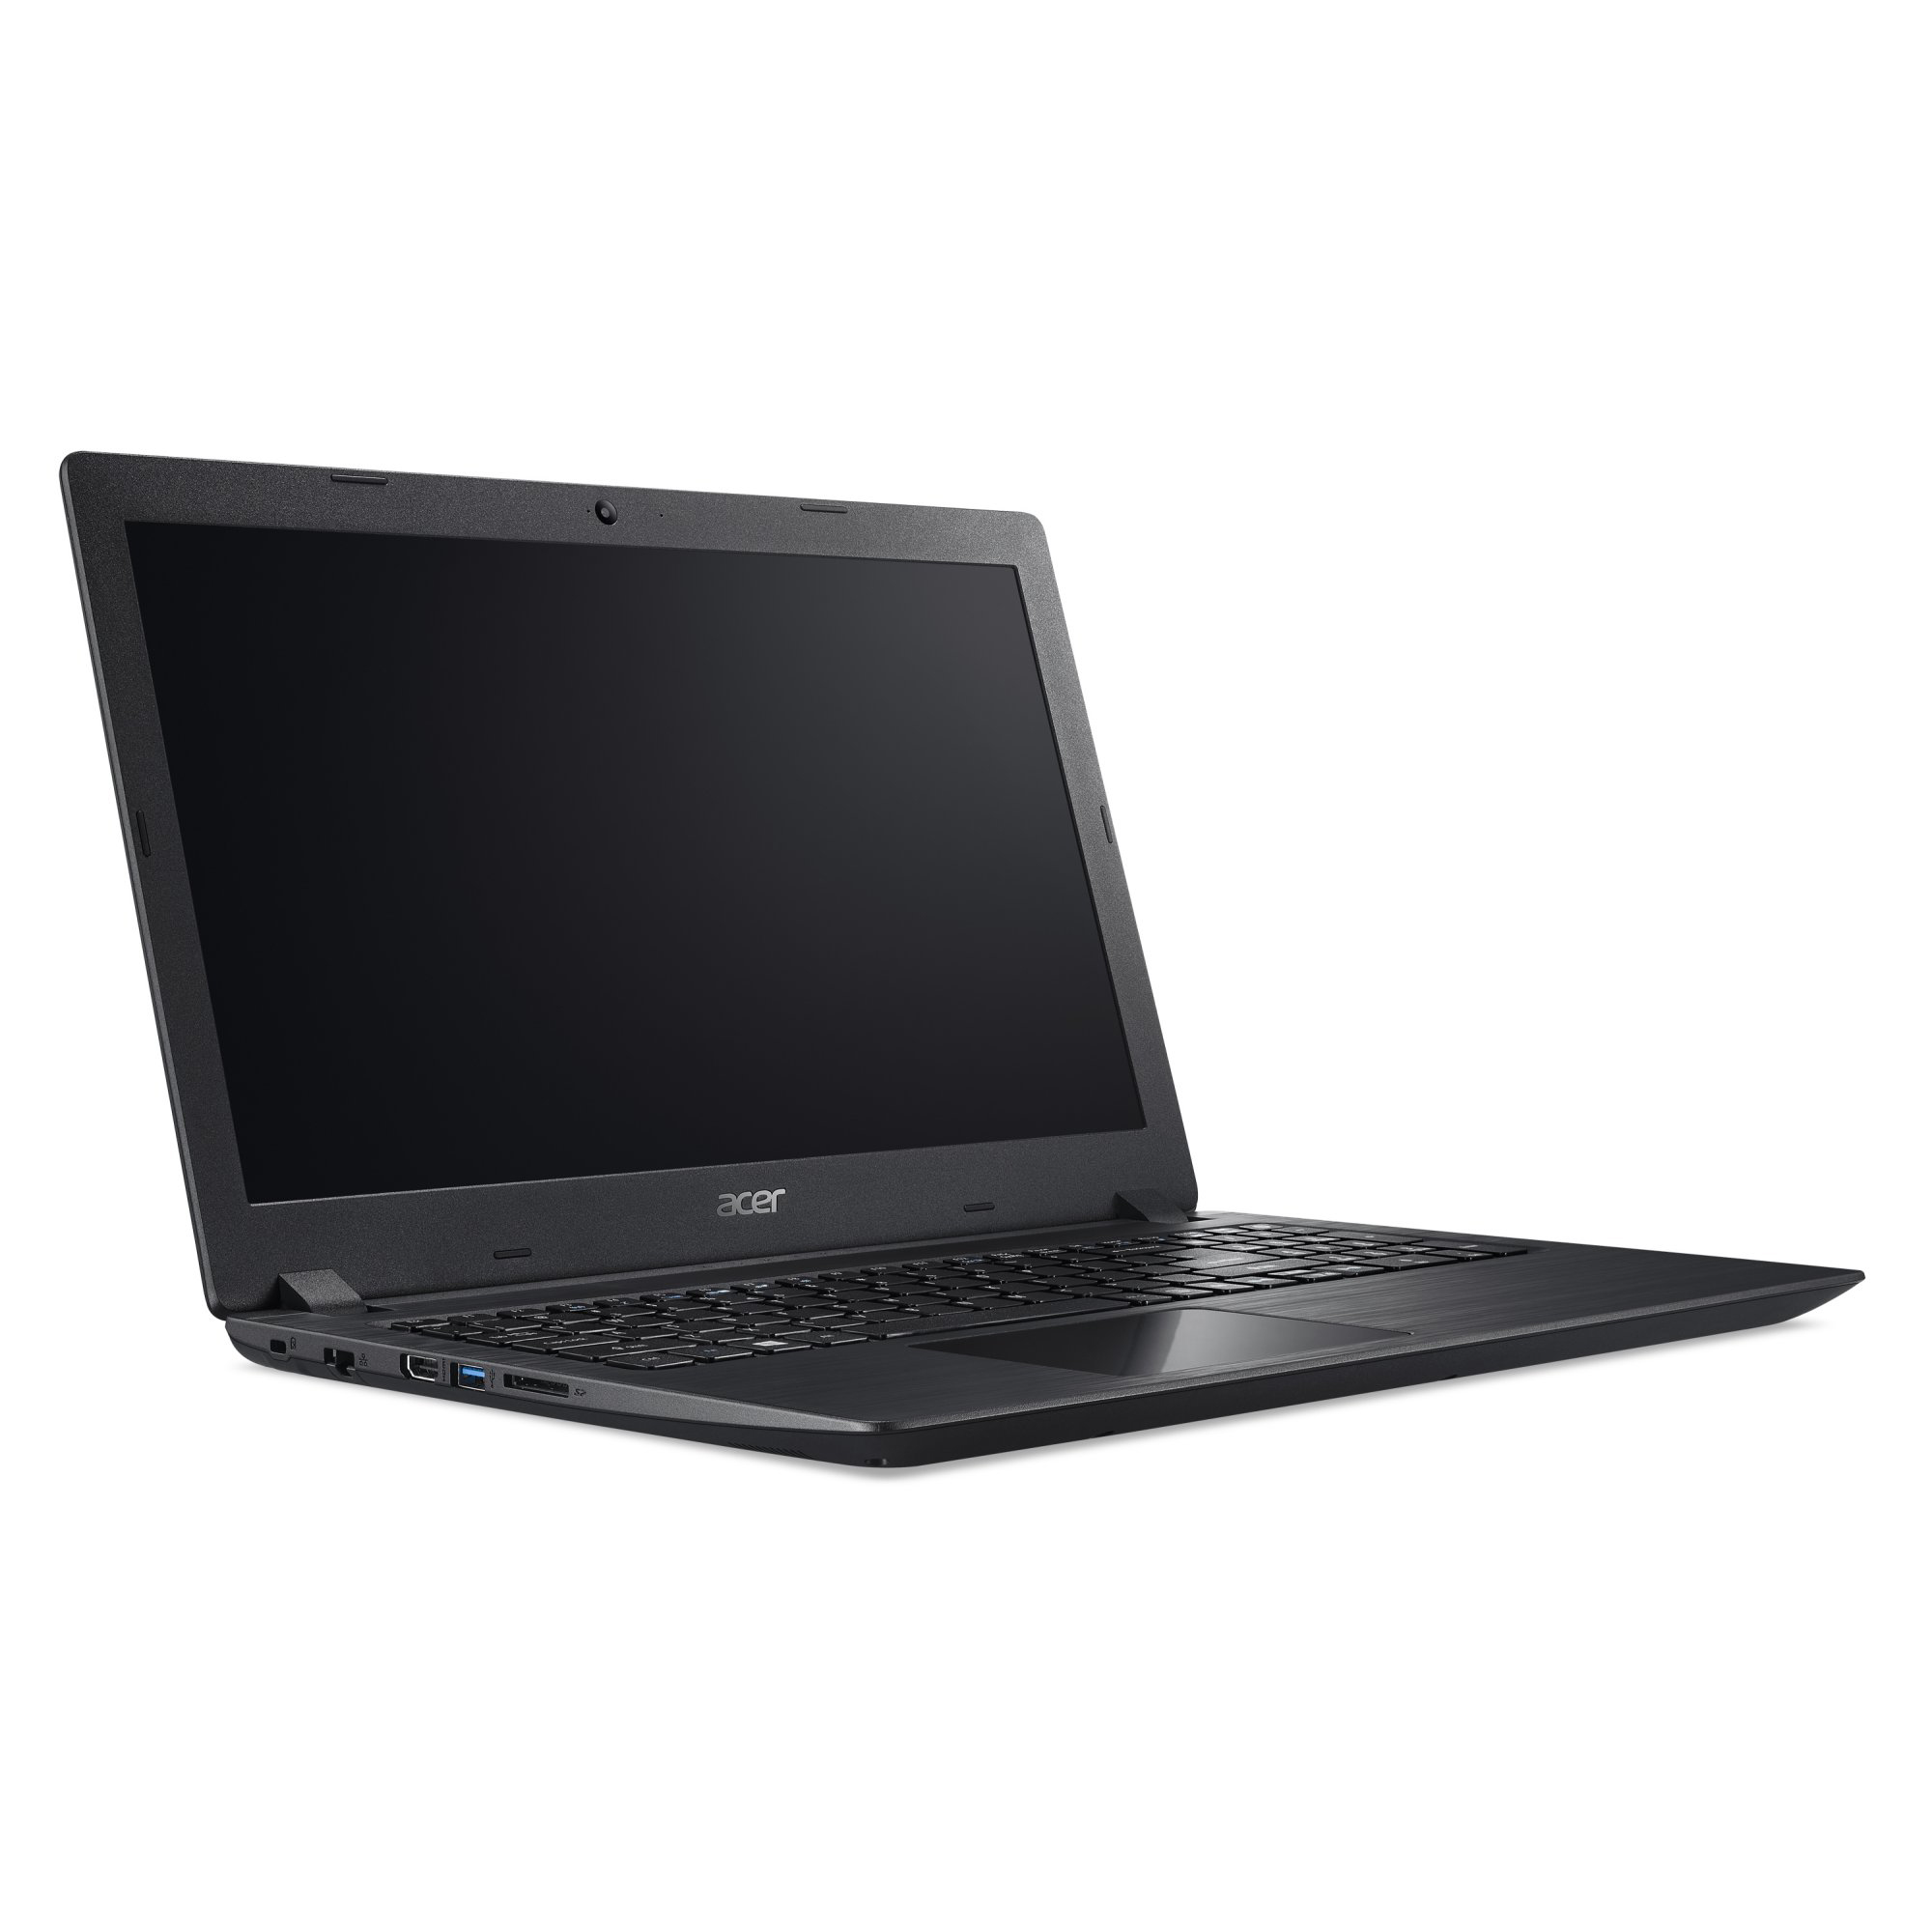 Acer A315-51-380T 15.6" Laptop, 7th Gen Intel Core i3-7100U, 4GB DDR4, 1TB HDD, Windows 10 Home - image 6 of 6